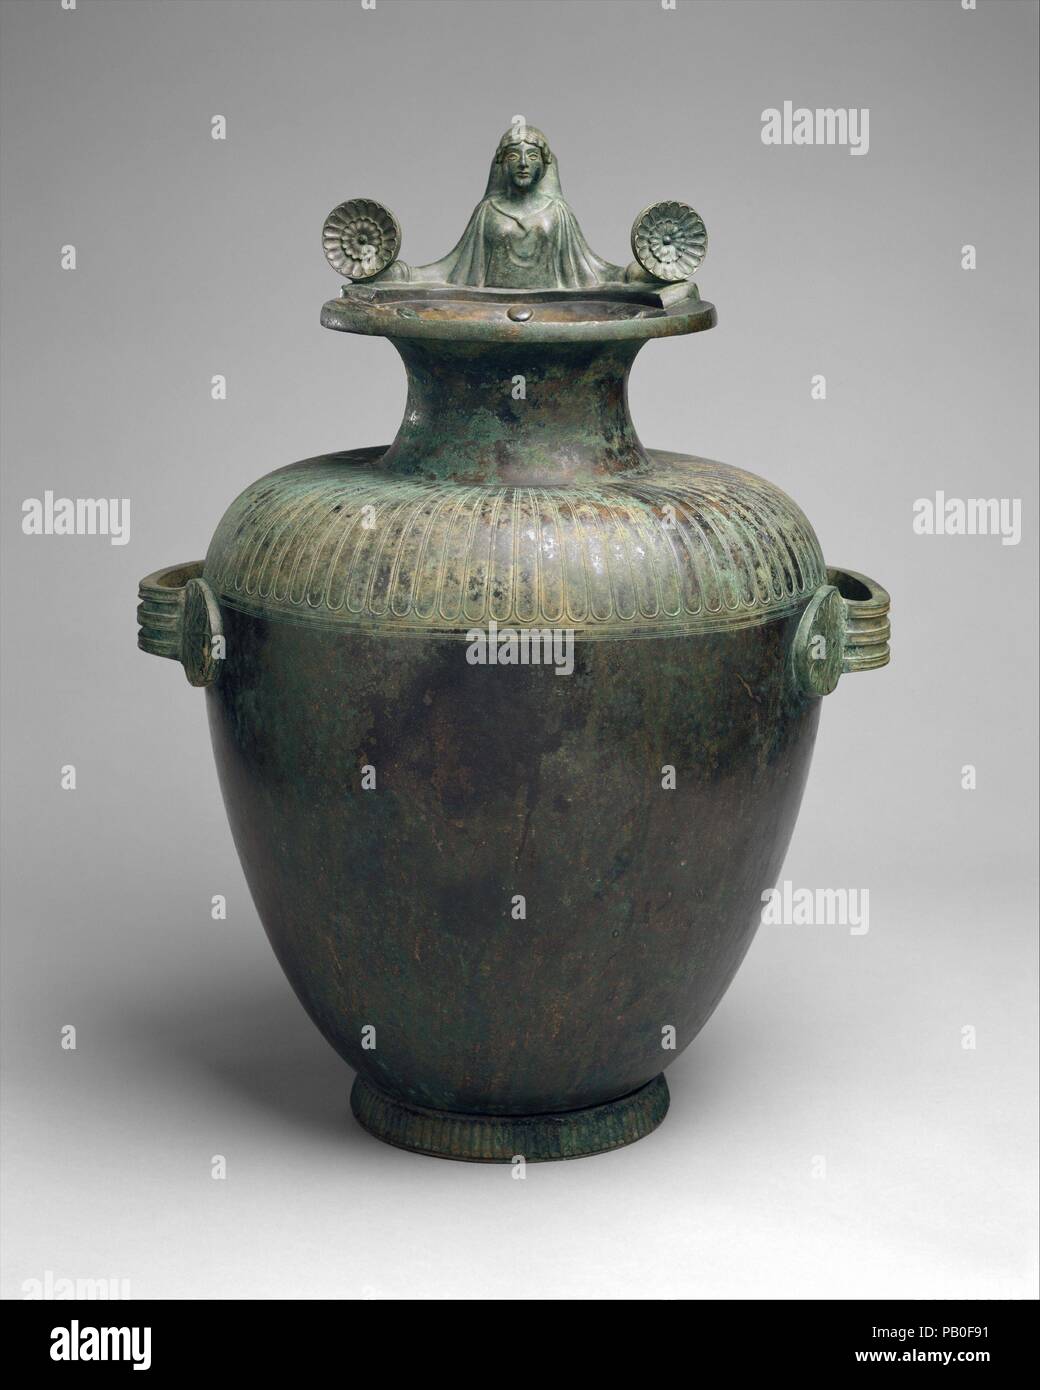 Bronze hydria (water jar). Culture: Greek, Argive. Dimensions: H. with handle 20 1/4 in. (51.41 cm). Date: mid-5th century B.C..  Inscribed on top of the mouth 'one of the prizes from Argive Hera'  This hydria, like Greek art in all its forms, is marked by clearly defined parts organized into a harmonious well-proportioned whole. The plain body swells gently to the shoulder zone, which turns inward with a soft, cushionlike curve. The shoulder is decorated with a simple shallow tongue pattern that echoes the vertical ribbing on the foot. The neck shoots up from the shoulder to a flaring mouth f Stock Photo